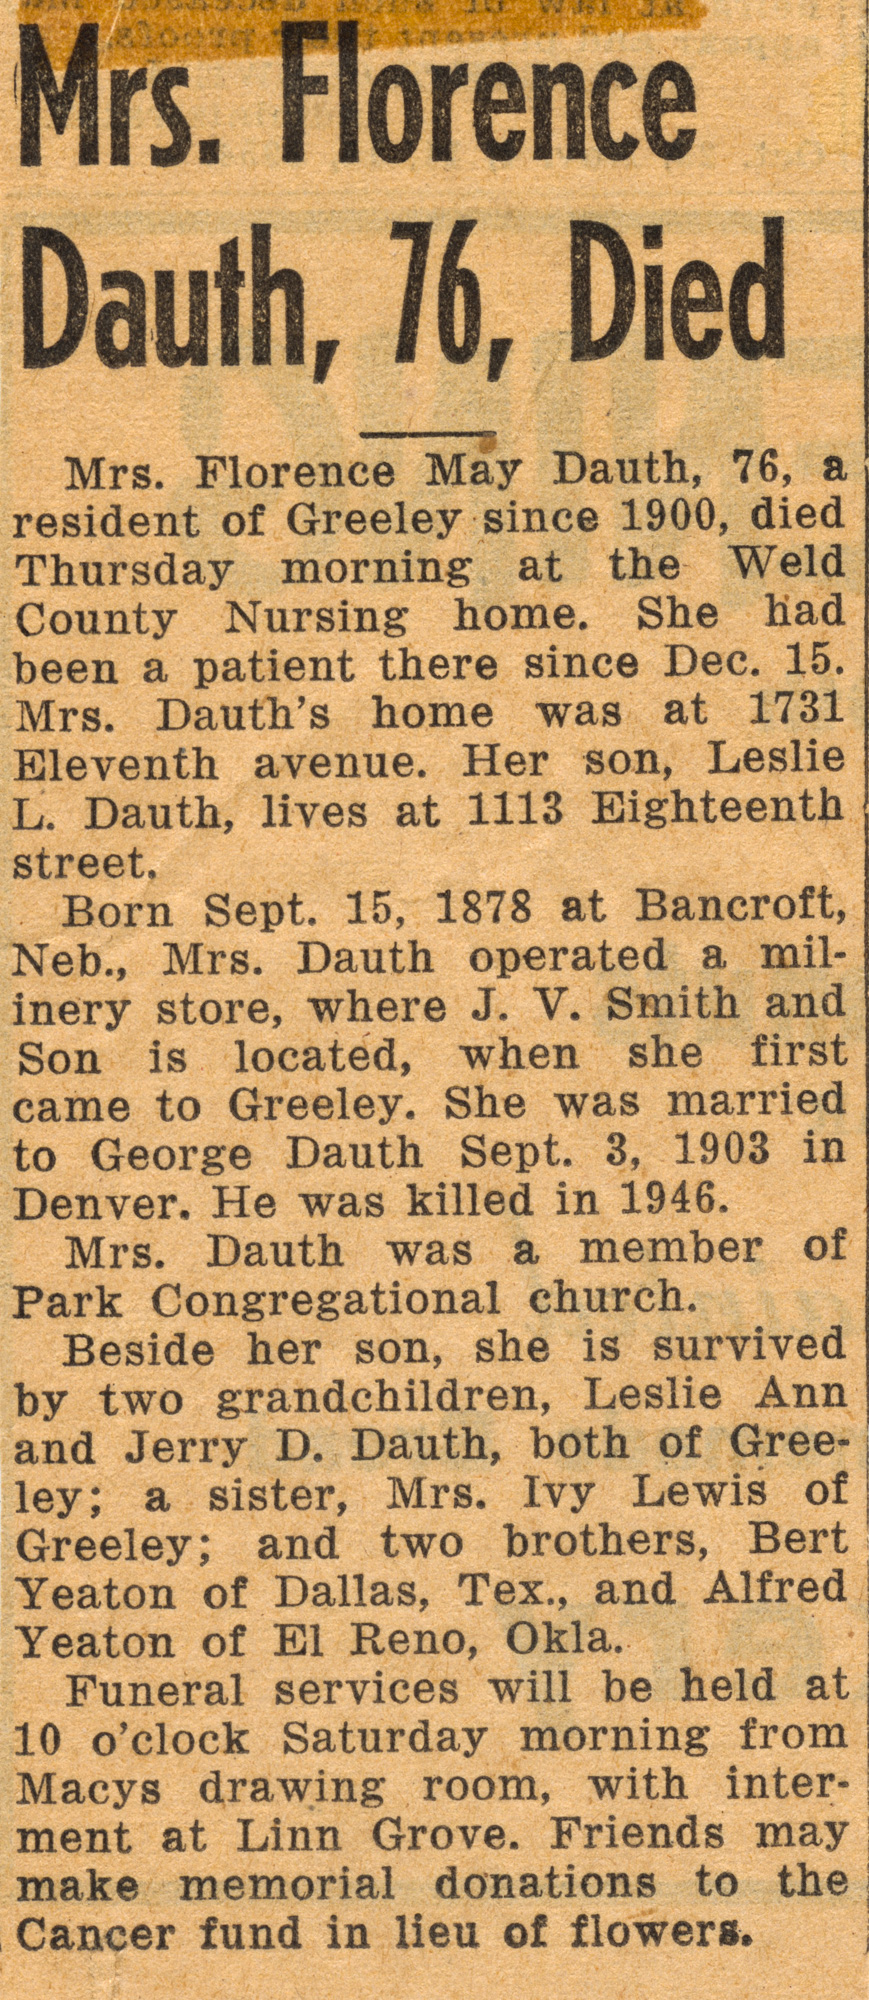 Dauth Family Archive - 1954-10-28 - Obituary of Florence Dauth